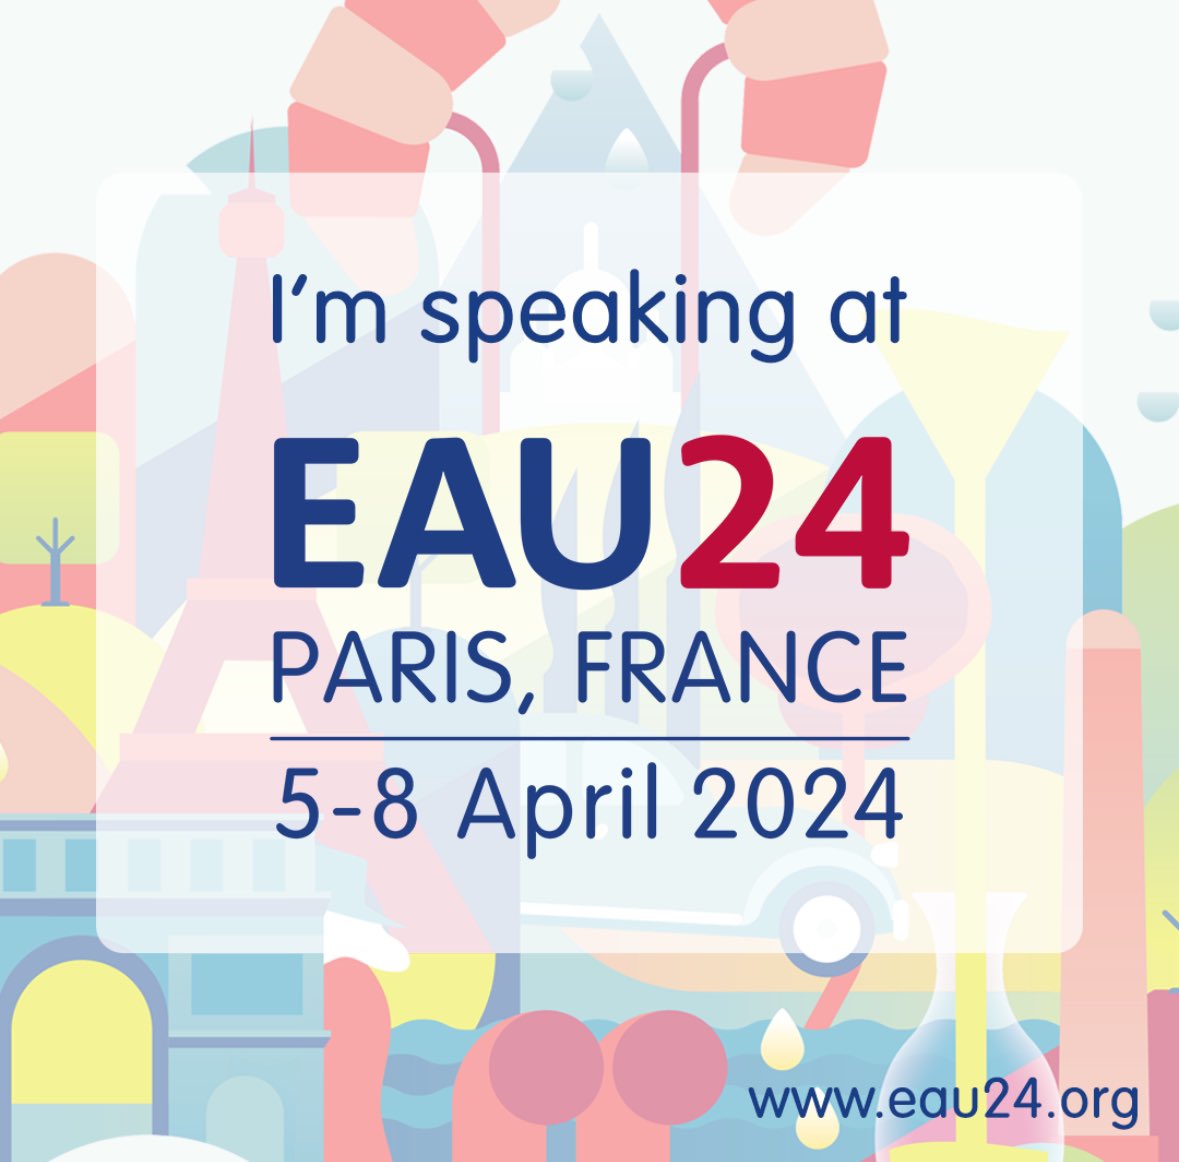 We will be presenting the first robotic #SinglePort series on partial nephrectomies friday morning at #EAU24 in a great session chaired by @u_capitanio. Join us to see more news and the latest techniques in nephron-sparing #RoboticSurgery.